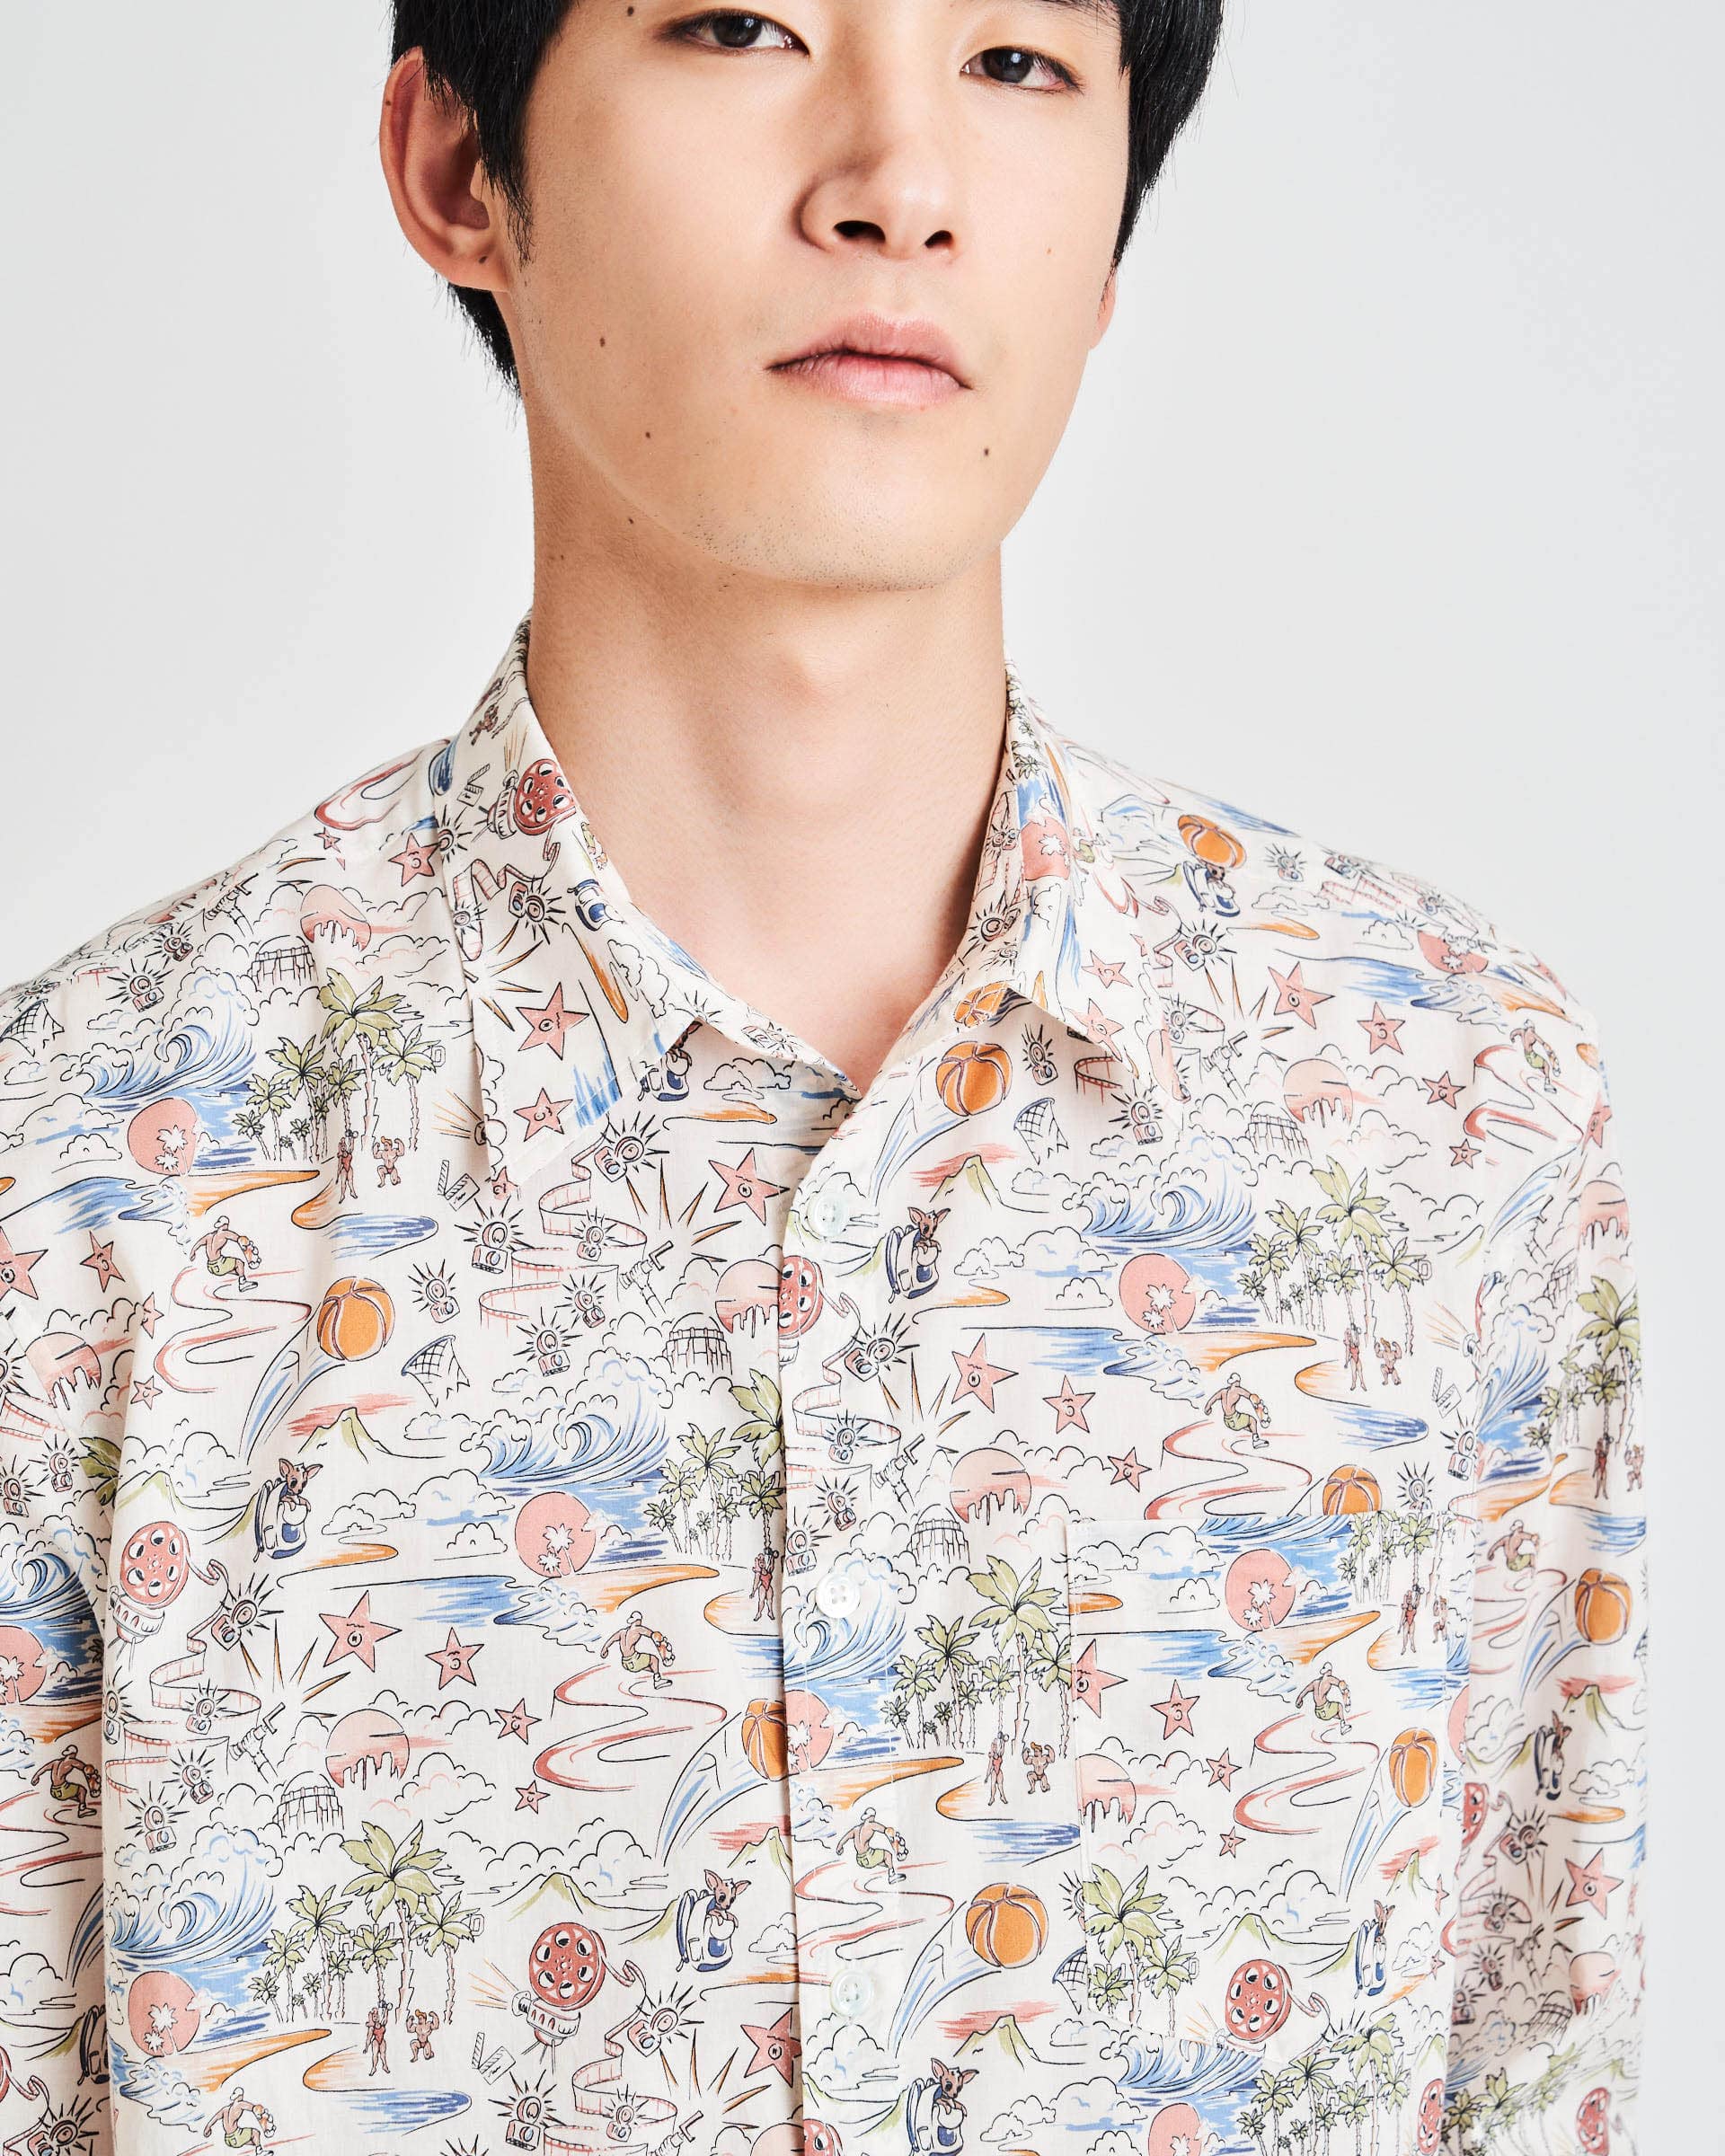 The Market Store | Printed Shirt